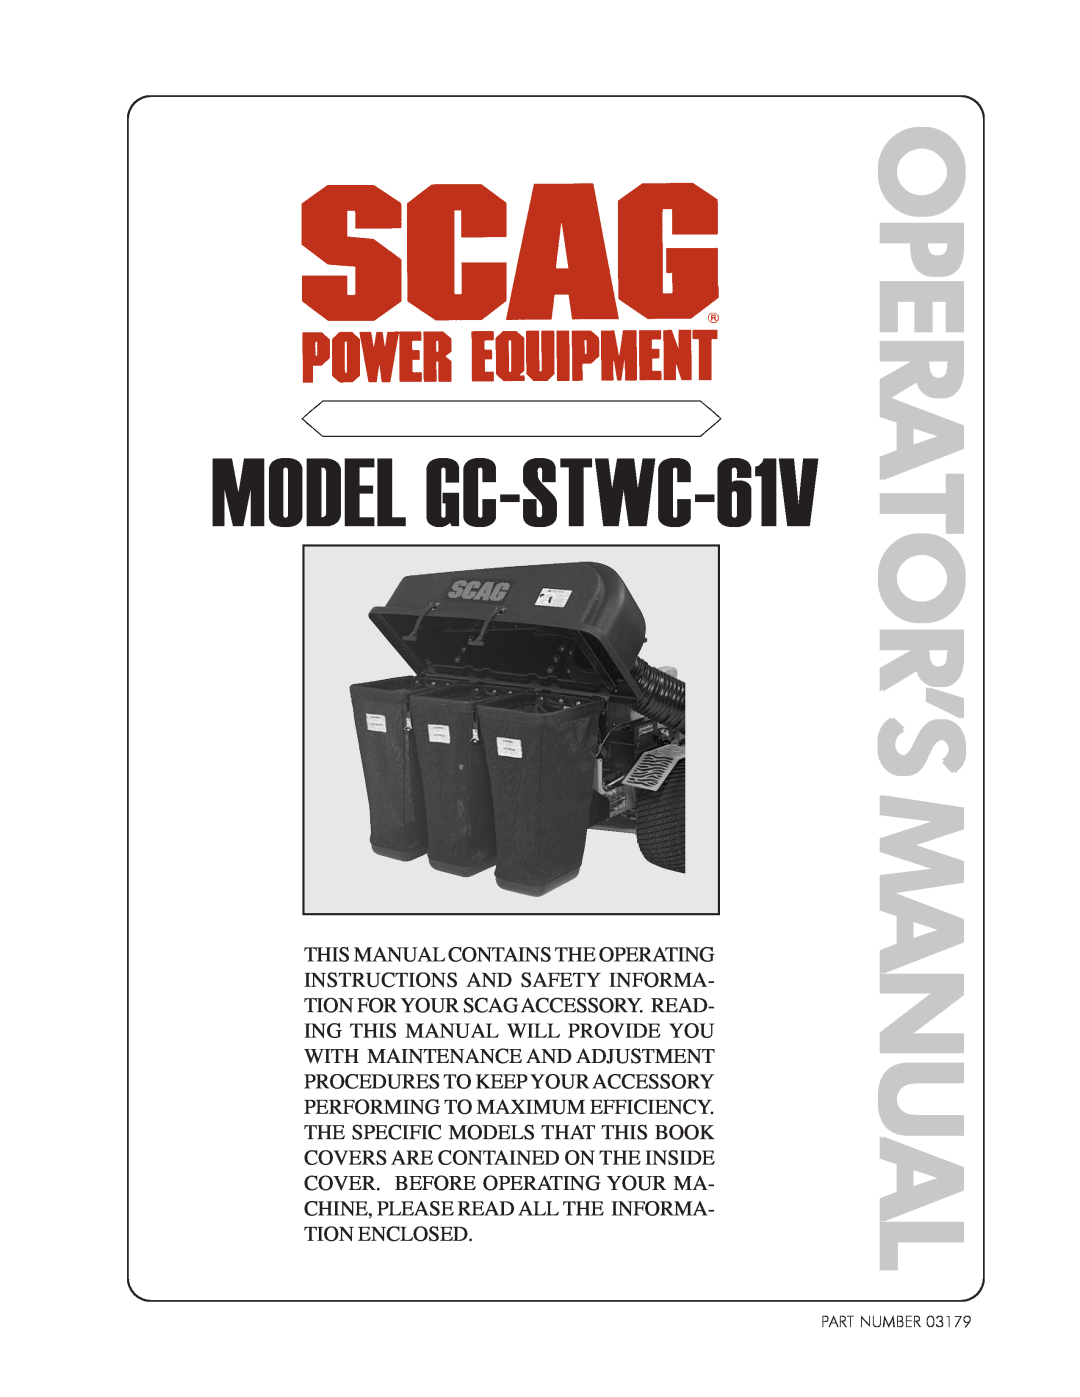 Scag Power Equipment operating instructions Operator’Smanual, MODEL GC-STWC-61V 